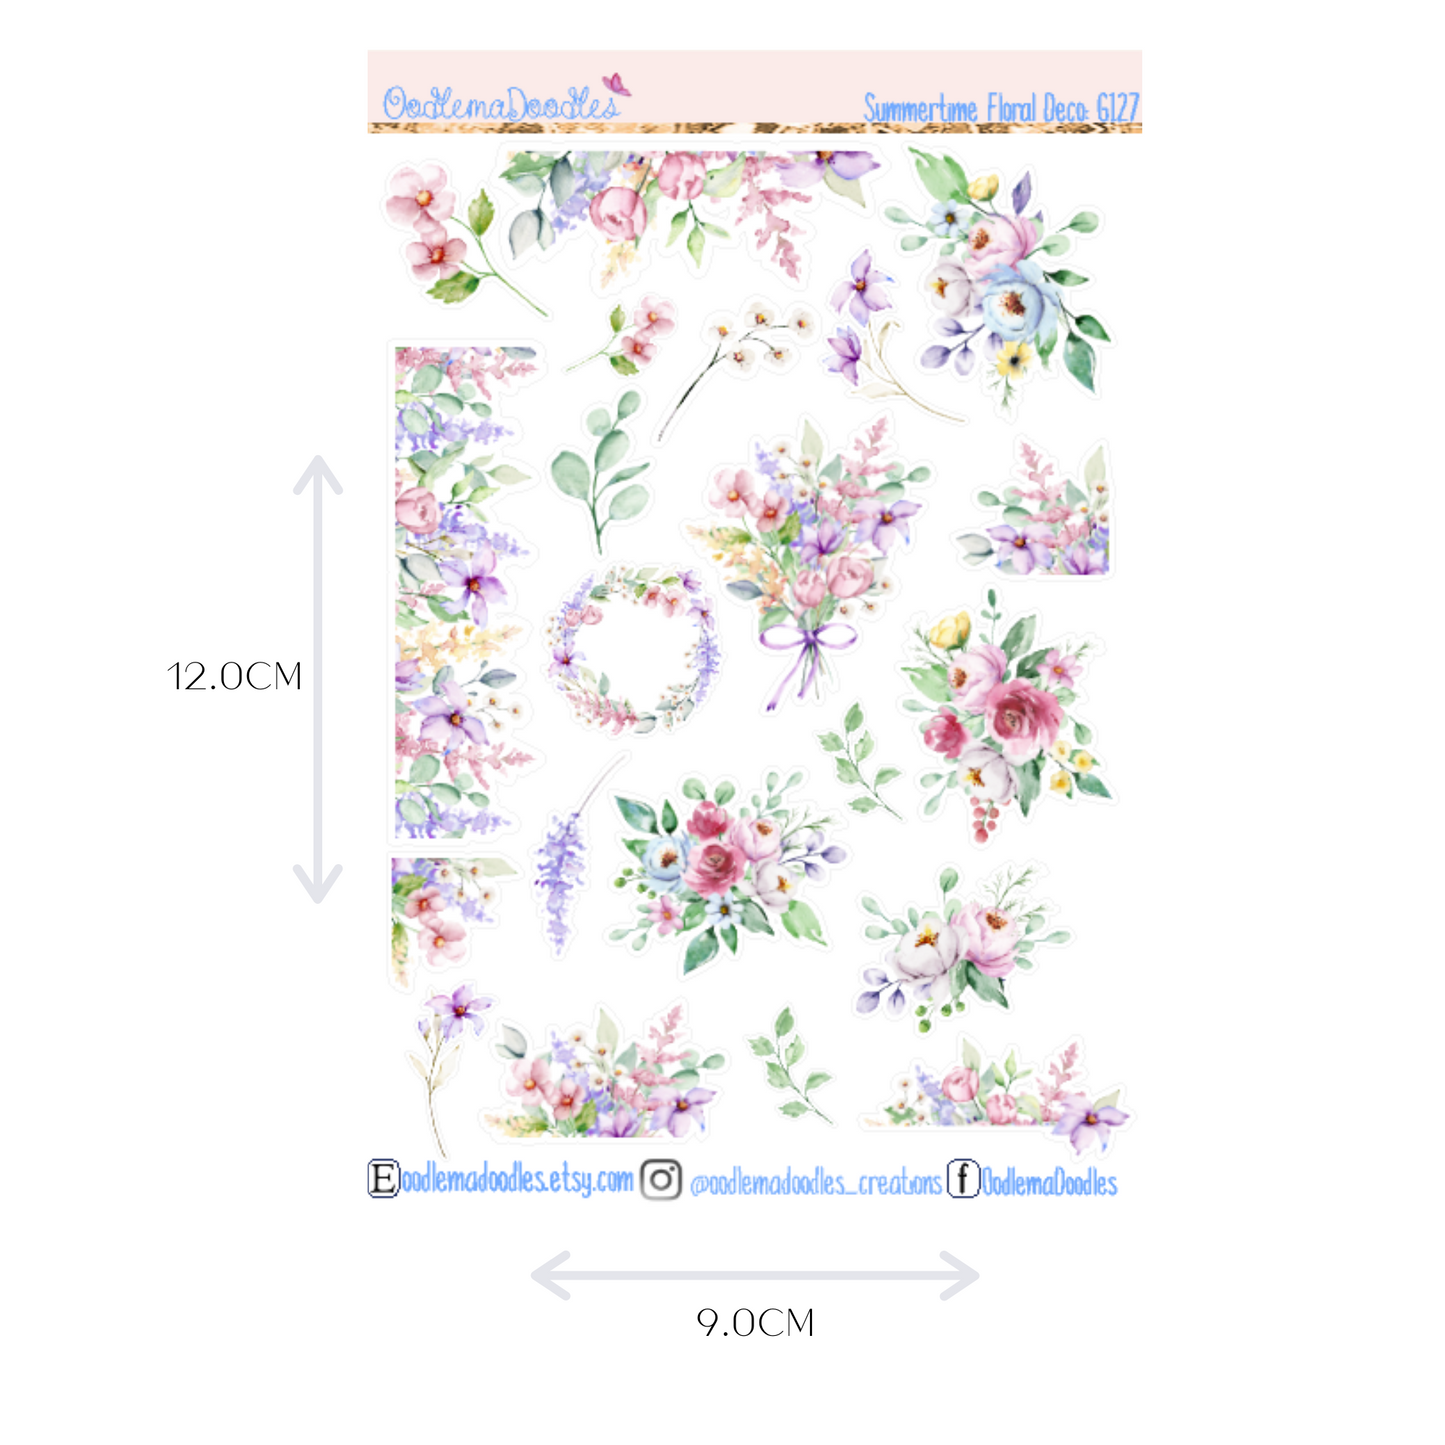 Summertime Floral Decorative Stickers